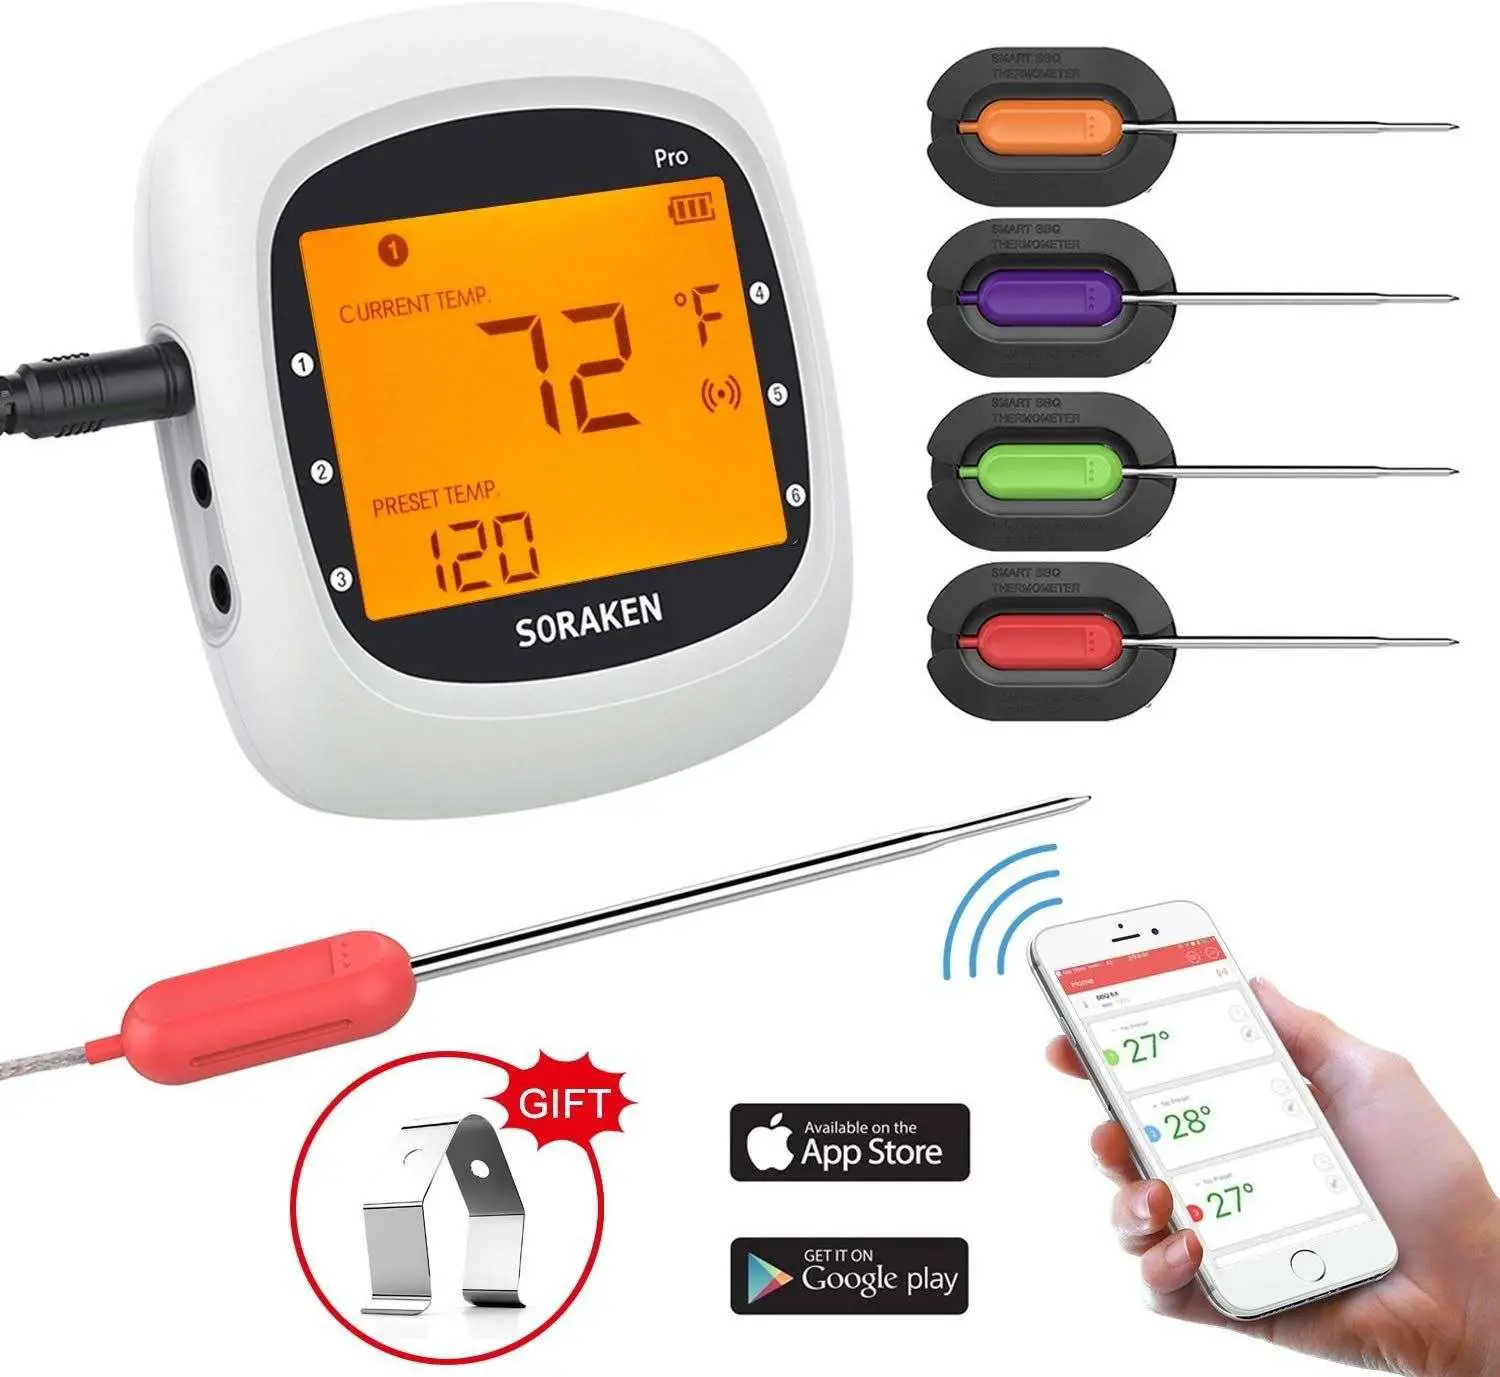 Top 10 Best Bluetooth Thermometer Reviews